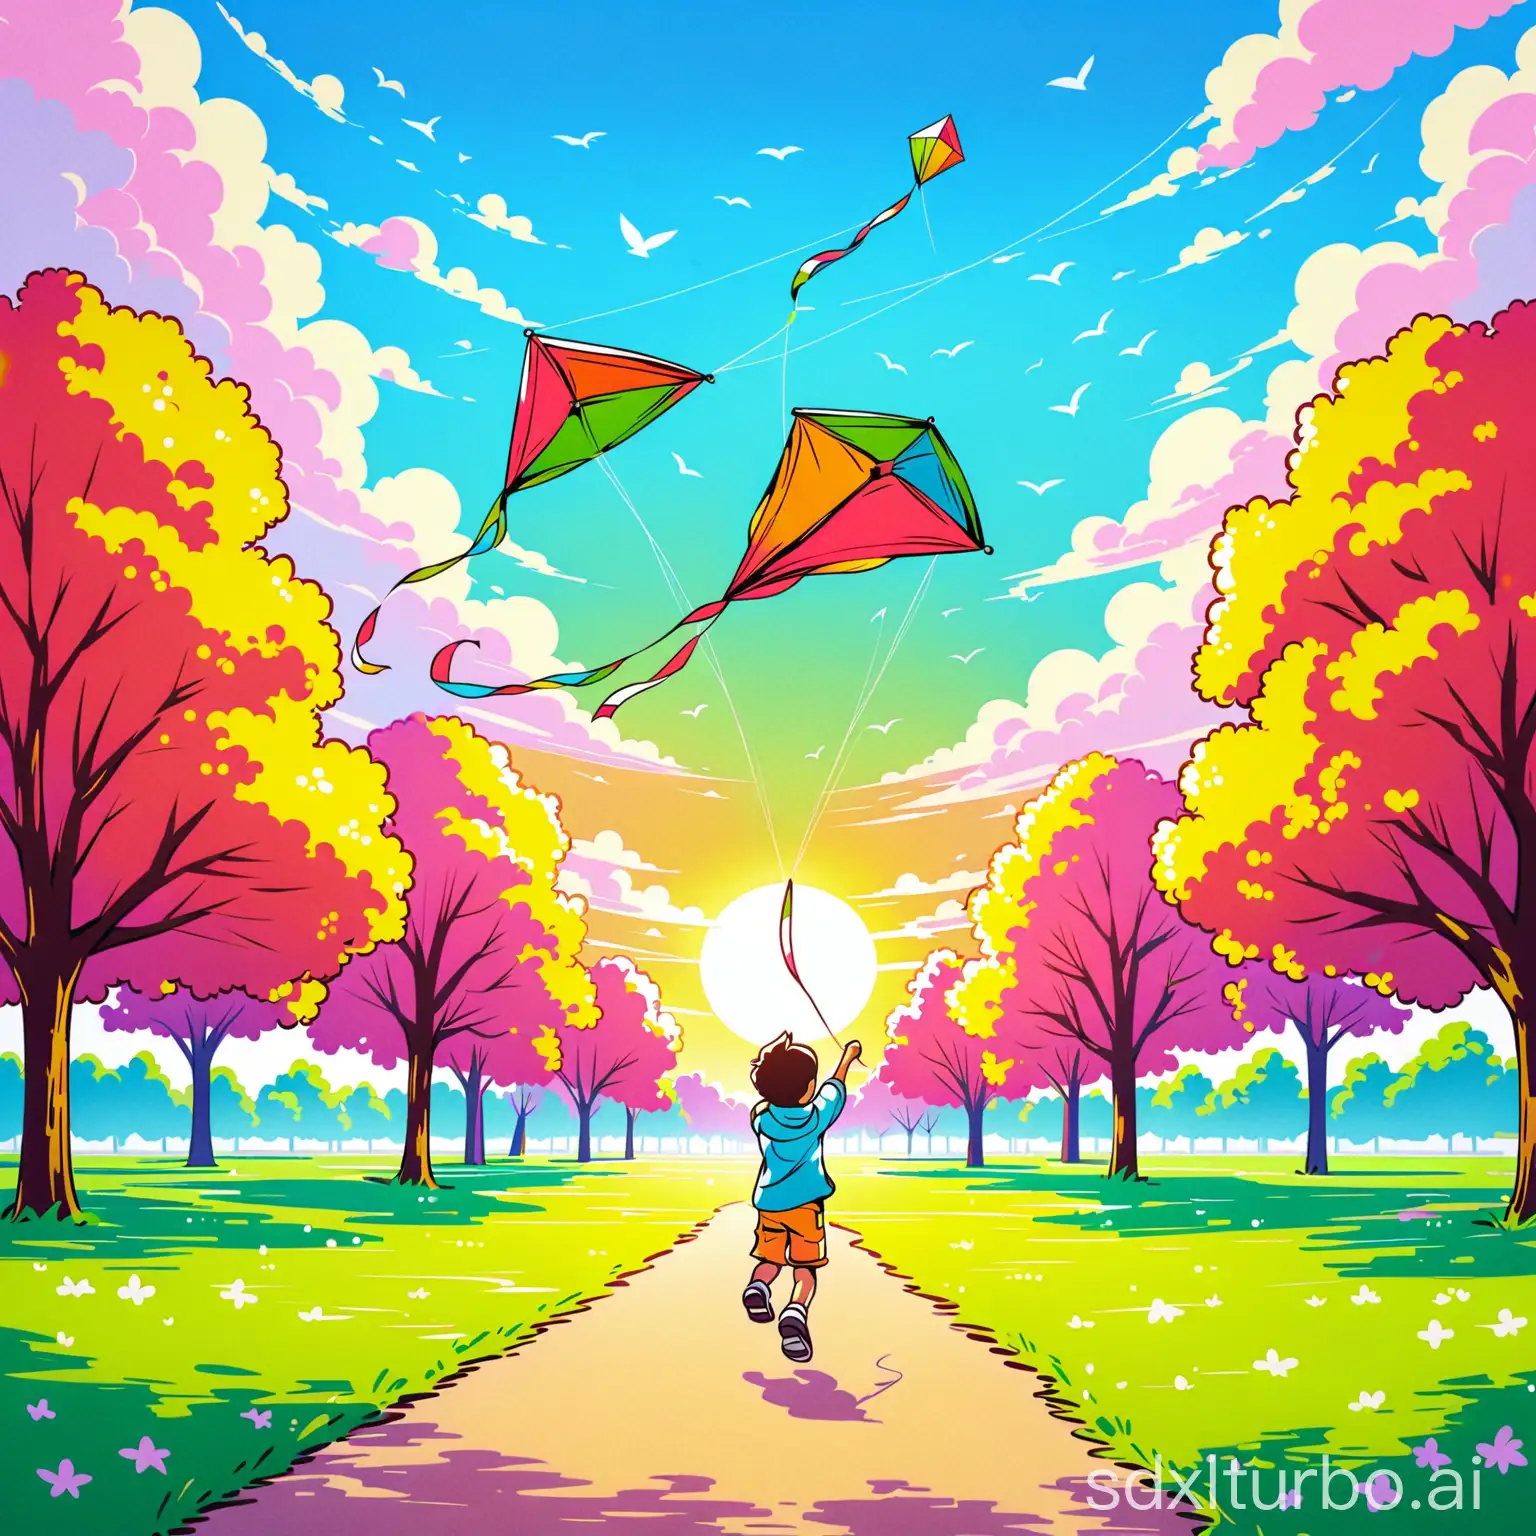 draw a picture about a boy flying a kite in a park ,in spring